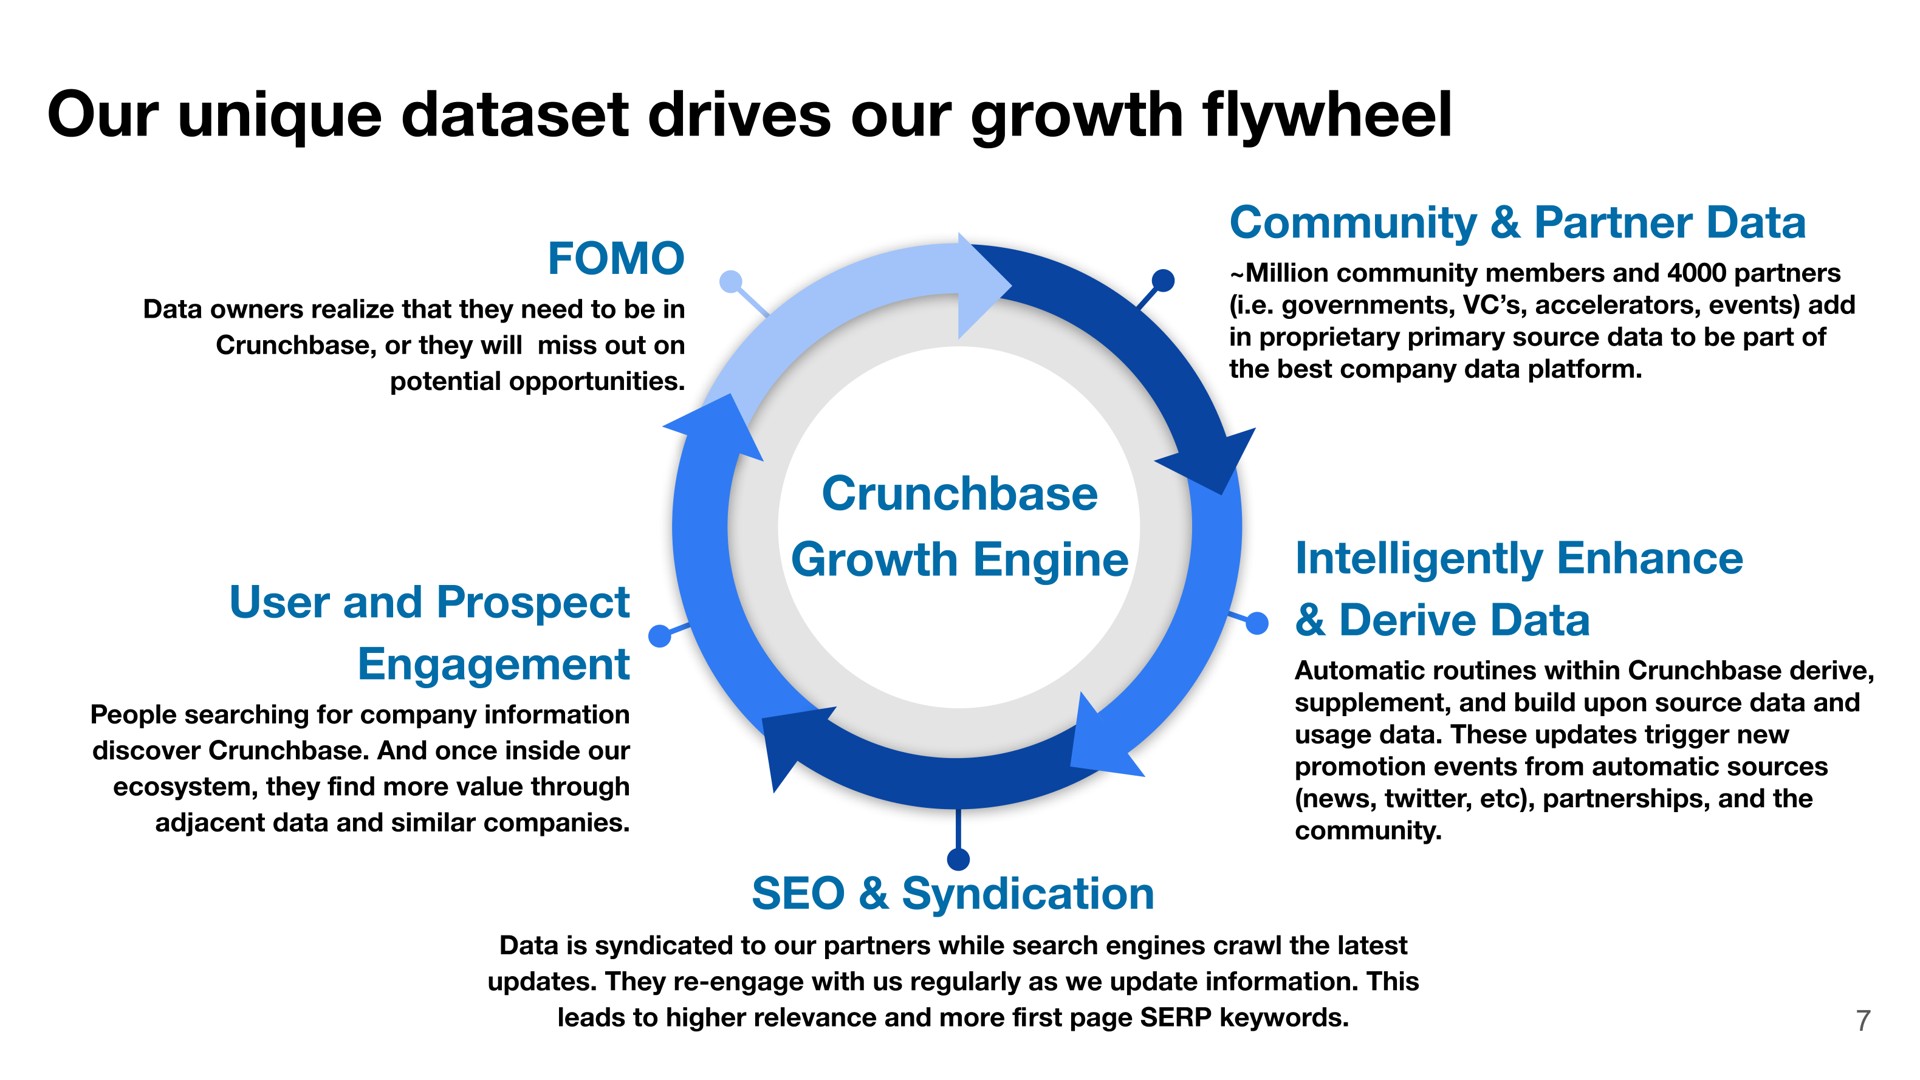 our unique drives our growth flywheel | Crunchbase